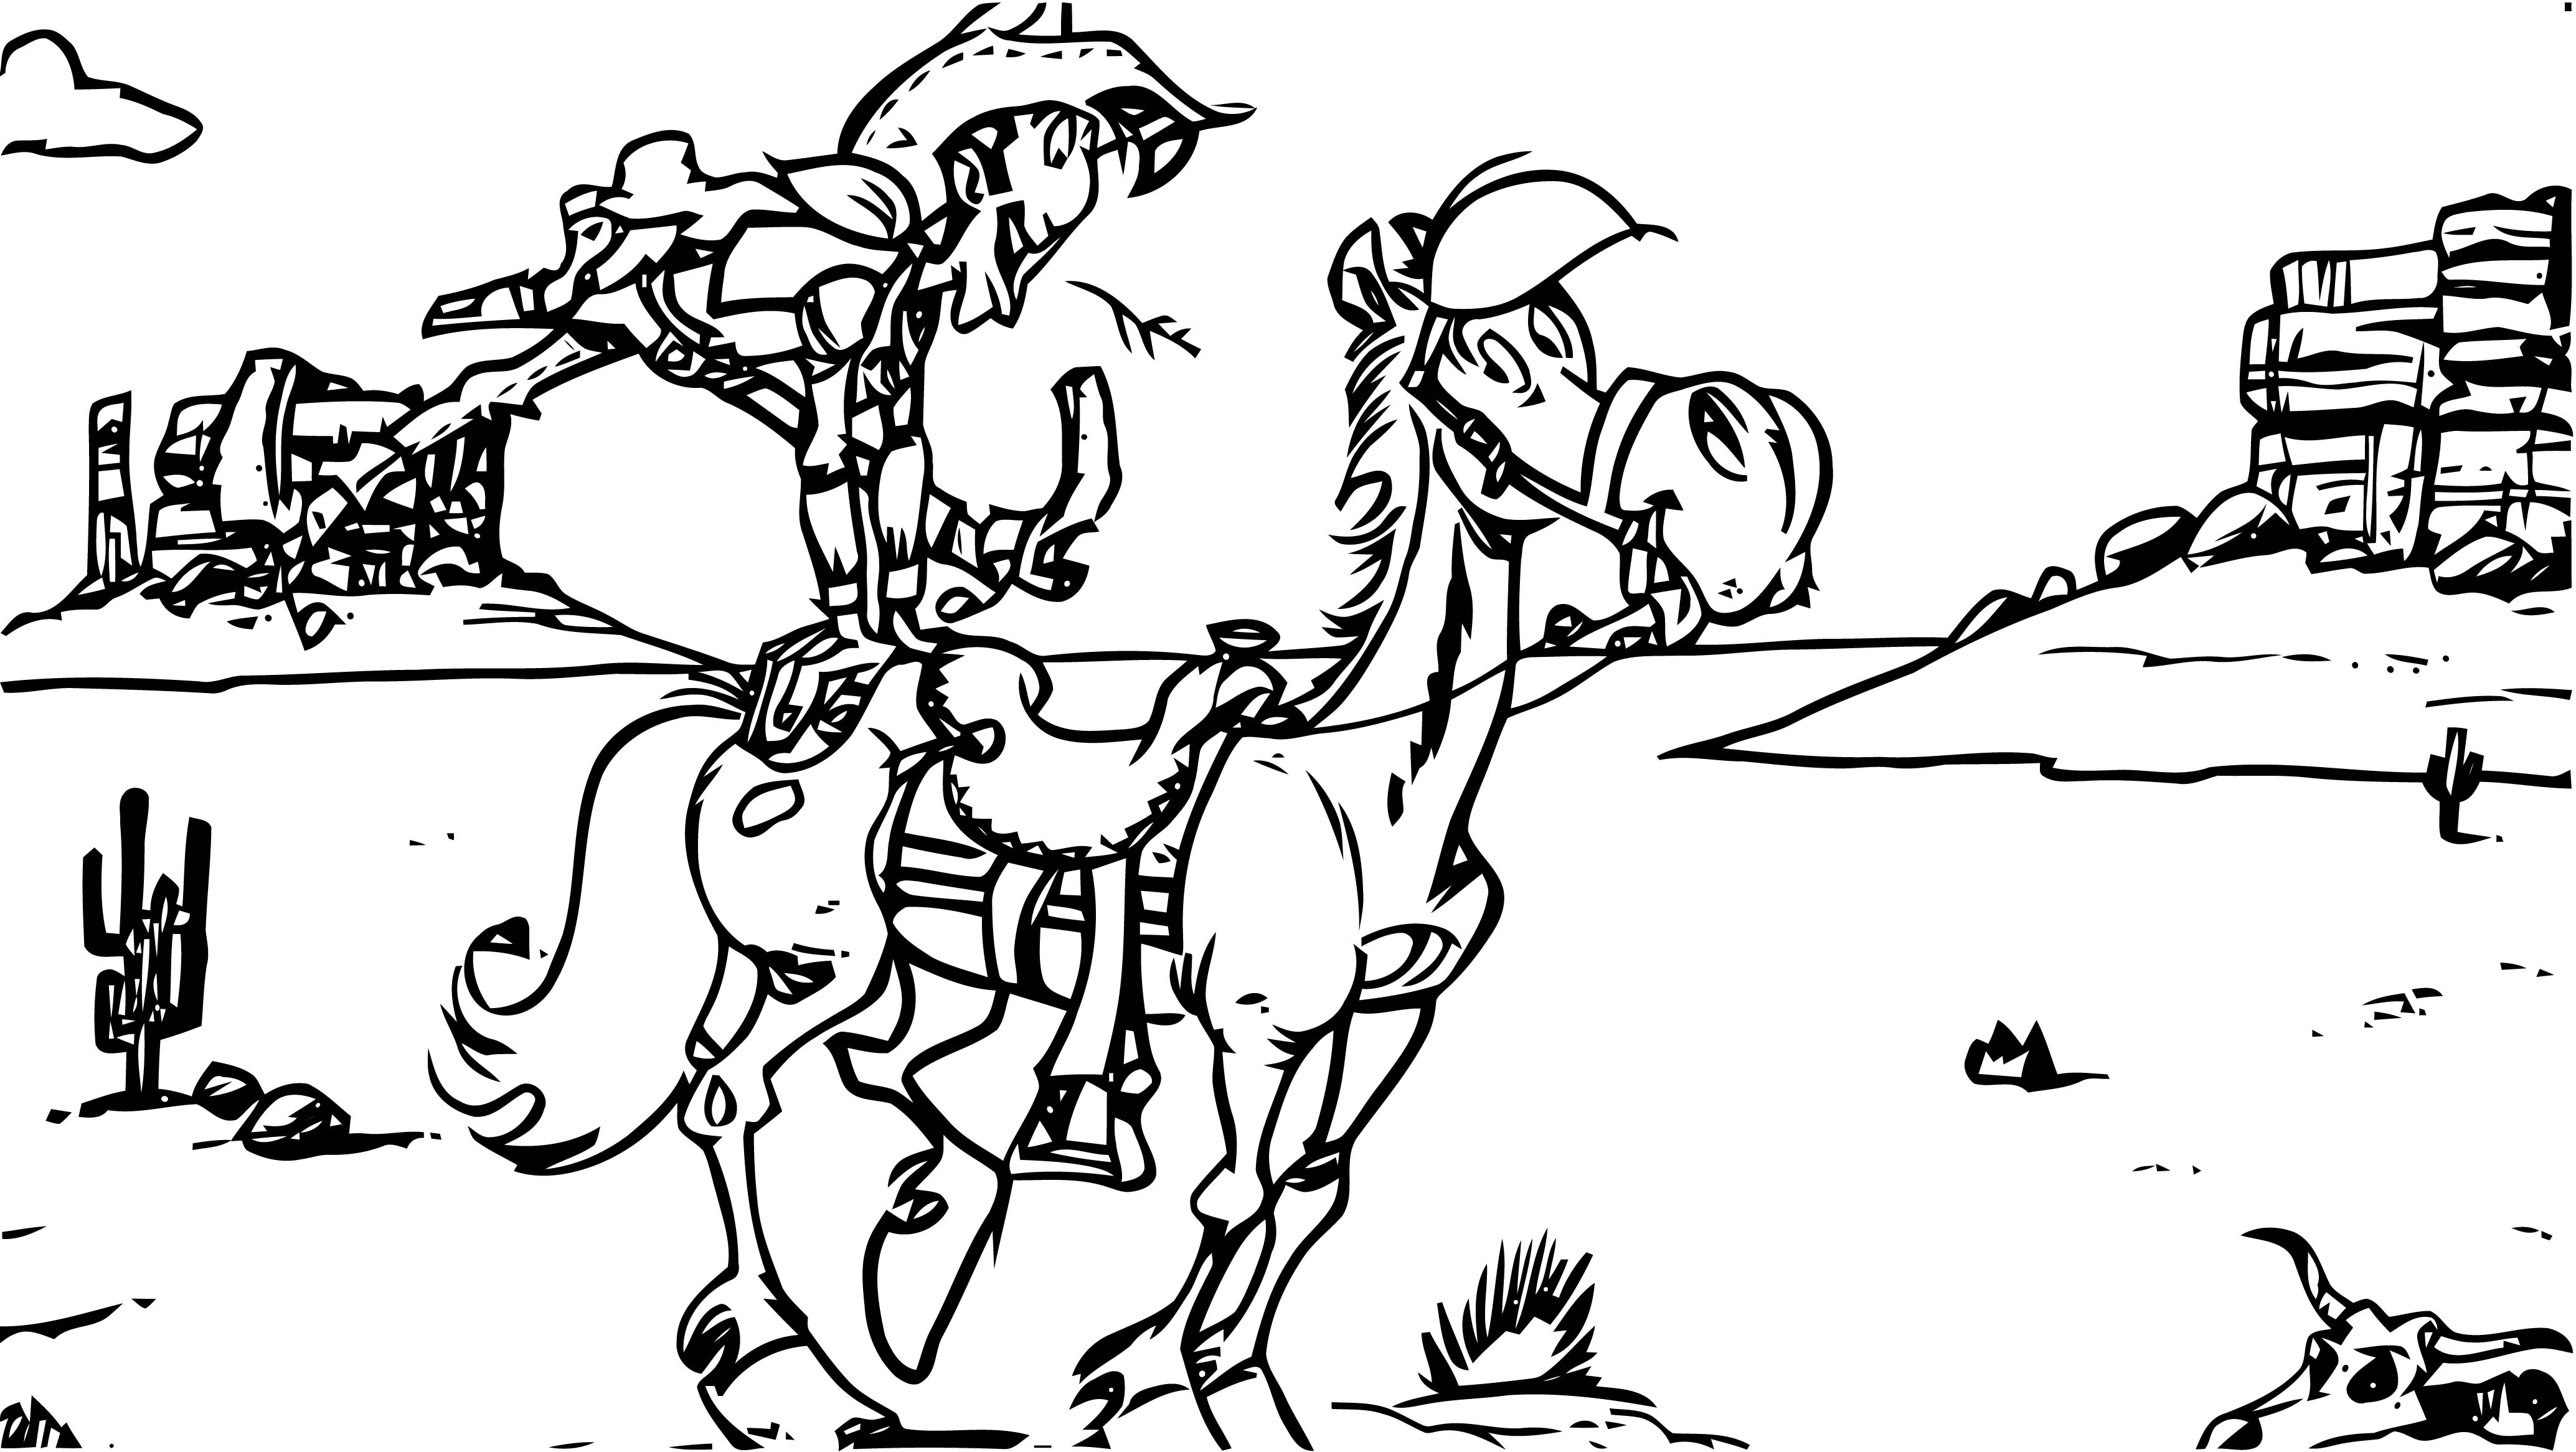 Lucky Luke Wallpapers 10 Coloring Page | Wecoloringpage.com